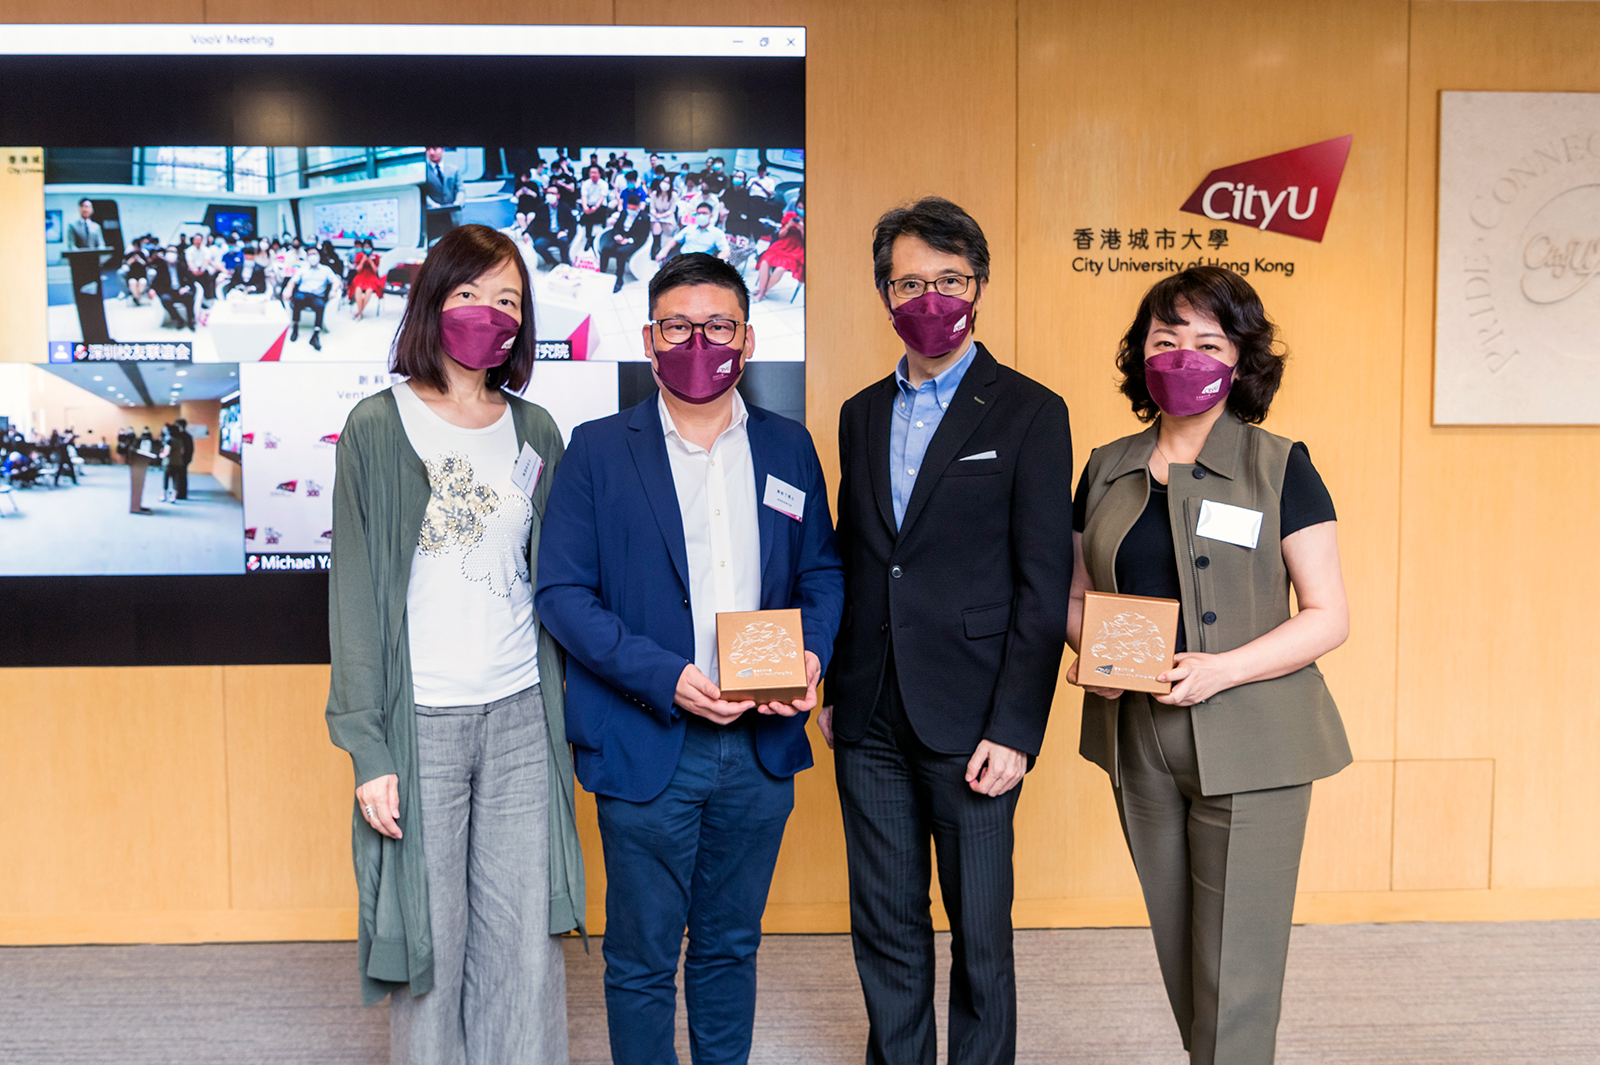 Professor Matthew Lee Kwok-on, Vice-President (Development and External Relations) (2nd from right), and Ms Kathy Chan Yin-ling, Associate Vice-President (Development and Alumni Relations) (1st from left), presented souvenirs to representatives of the Shenzhen Alumni Chapter and CityU Eminence Society.